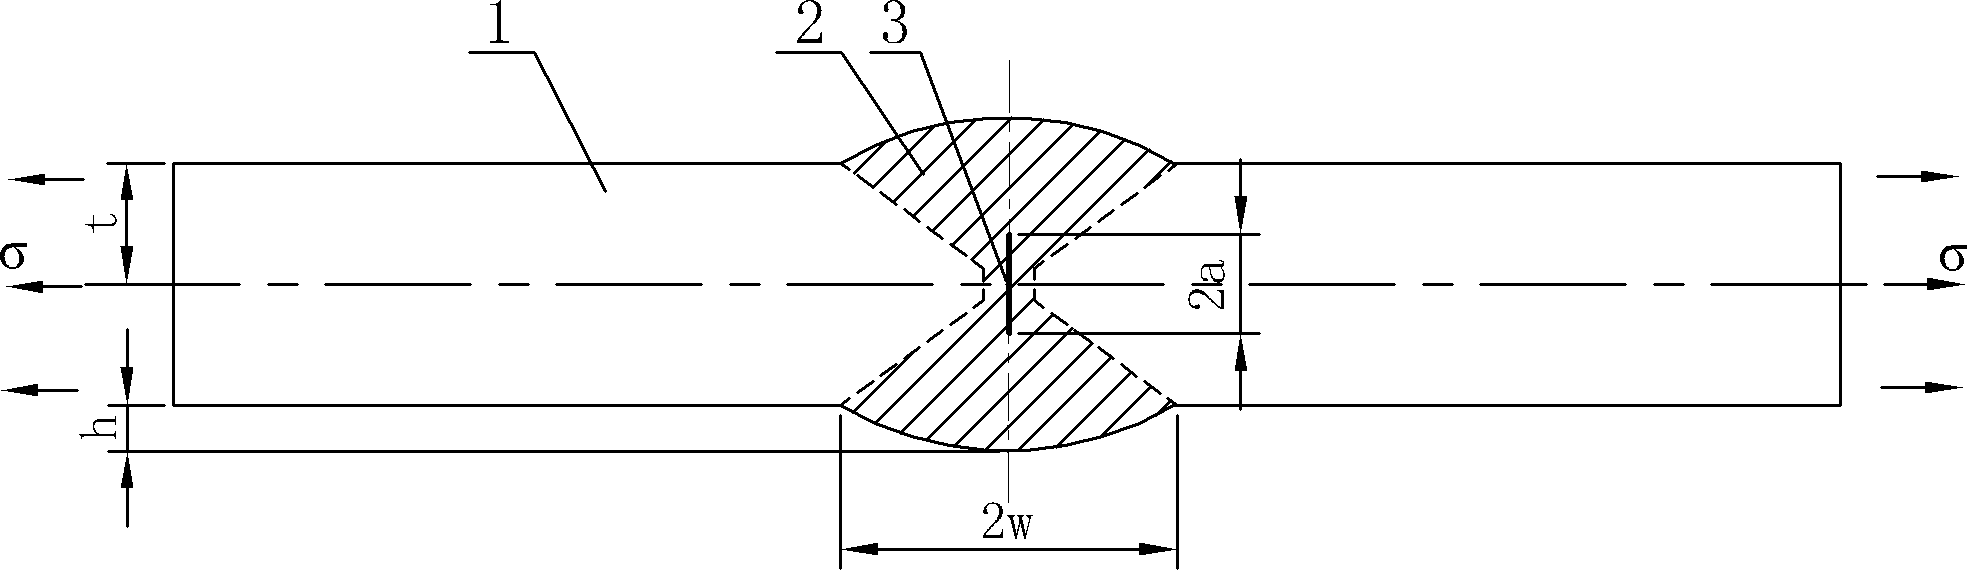 Designing method for realizing equal load-carrying of tension-loaded butt joint with central crack on welding line, and application of K factor